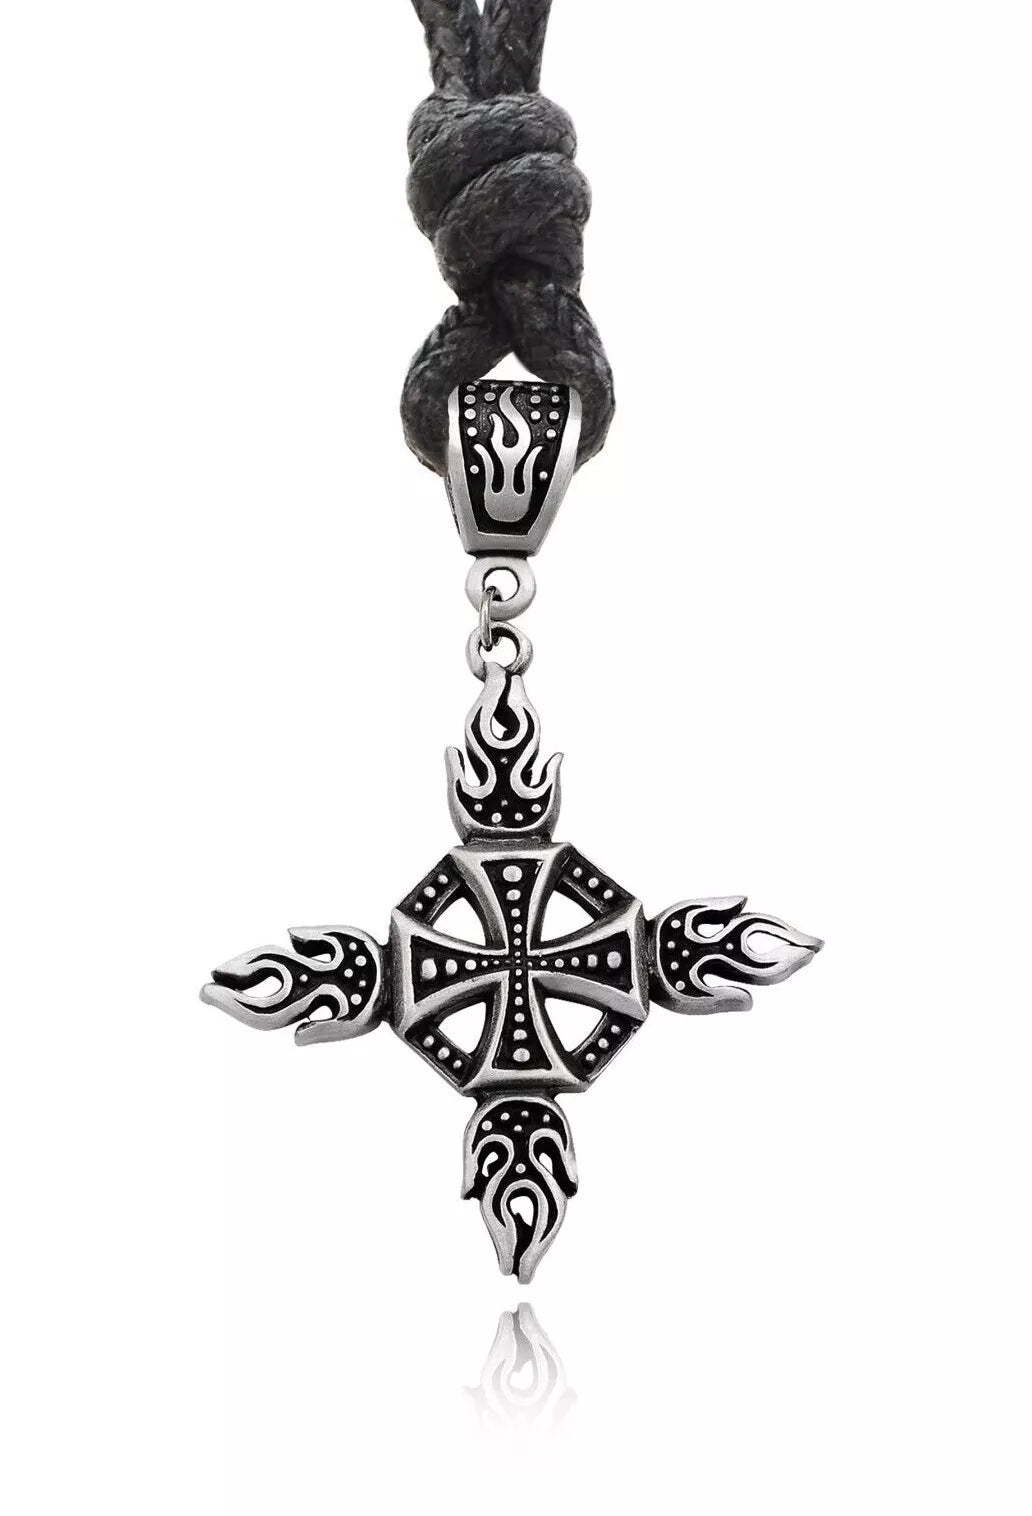 New German Iron Cross Silver Pewter Charm Necklace Pendant Jewelry